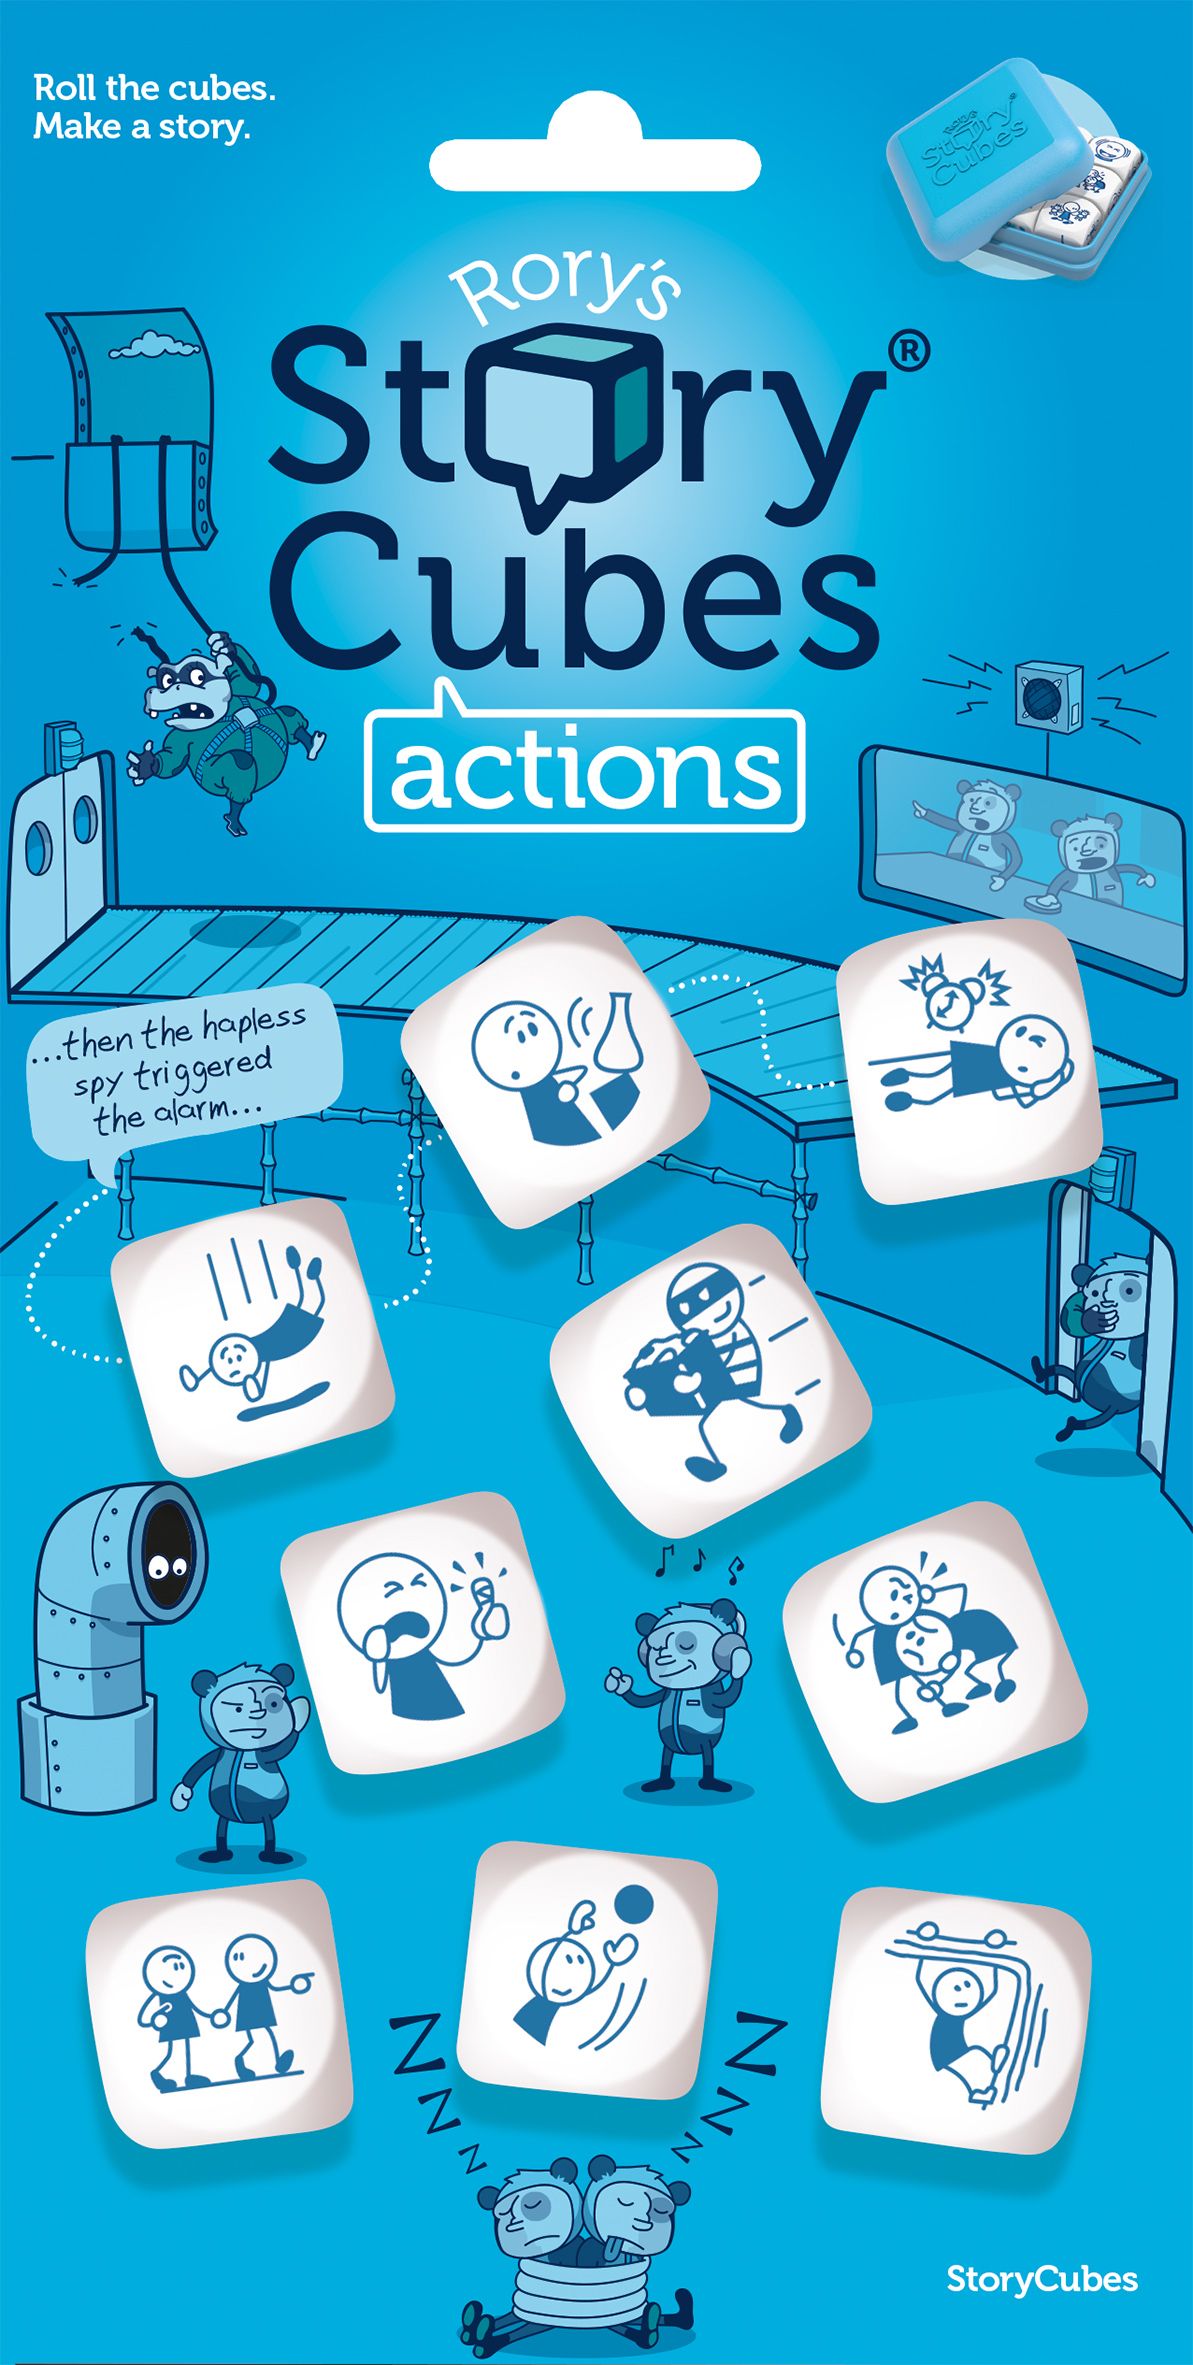 Rory's Story Cubes Mystery – Story Cubes